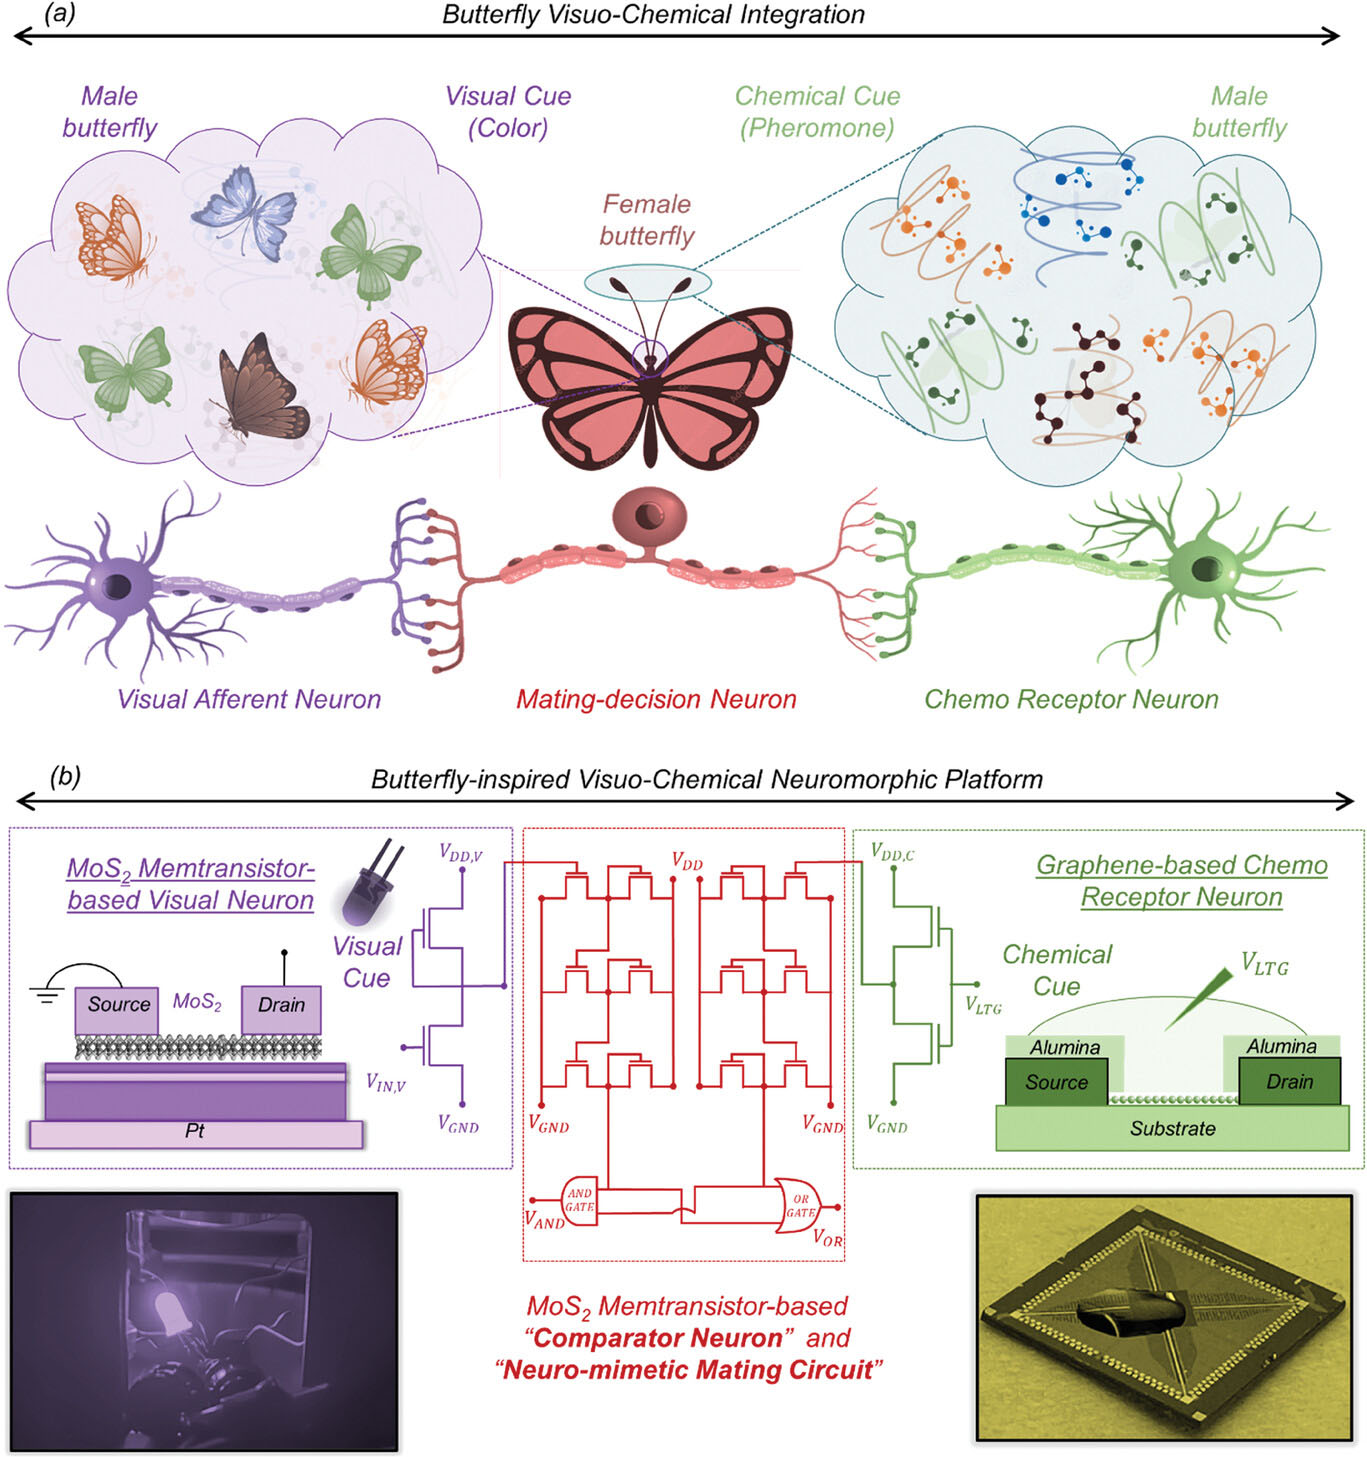 Butterfly-inspired visuo-chemical integration for neuromorphic computing